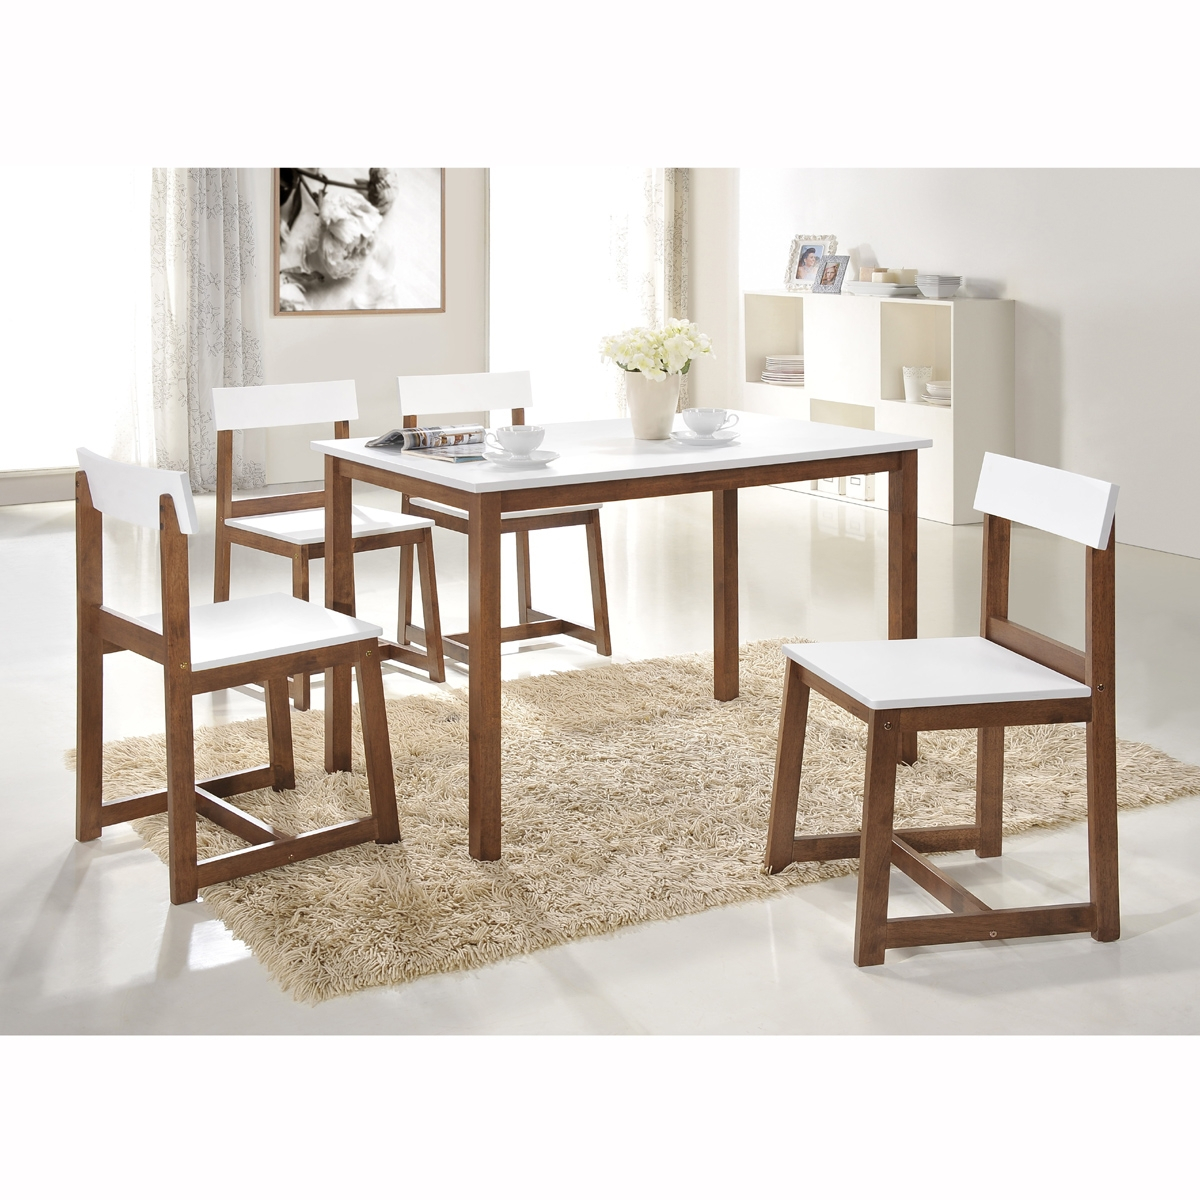 Dining Room Table Sets Vancouver Bc • Faucet Ideas Site